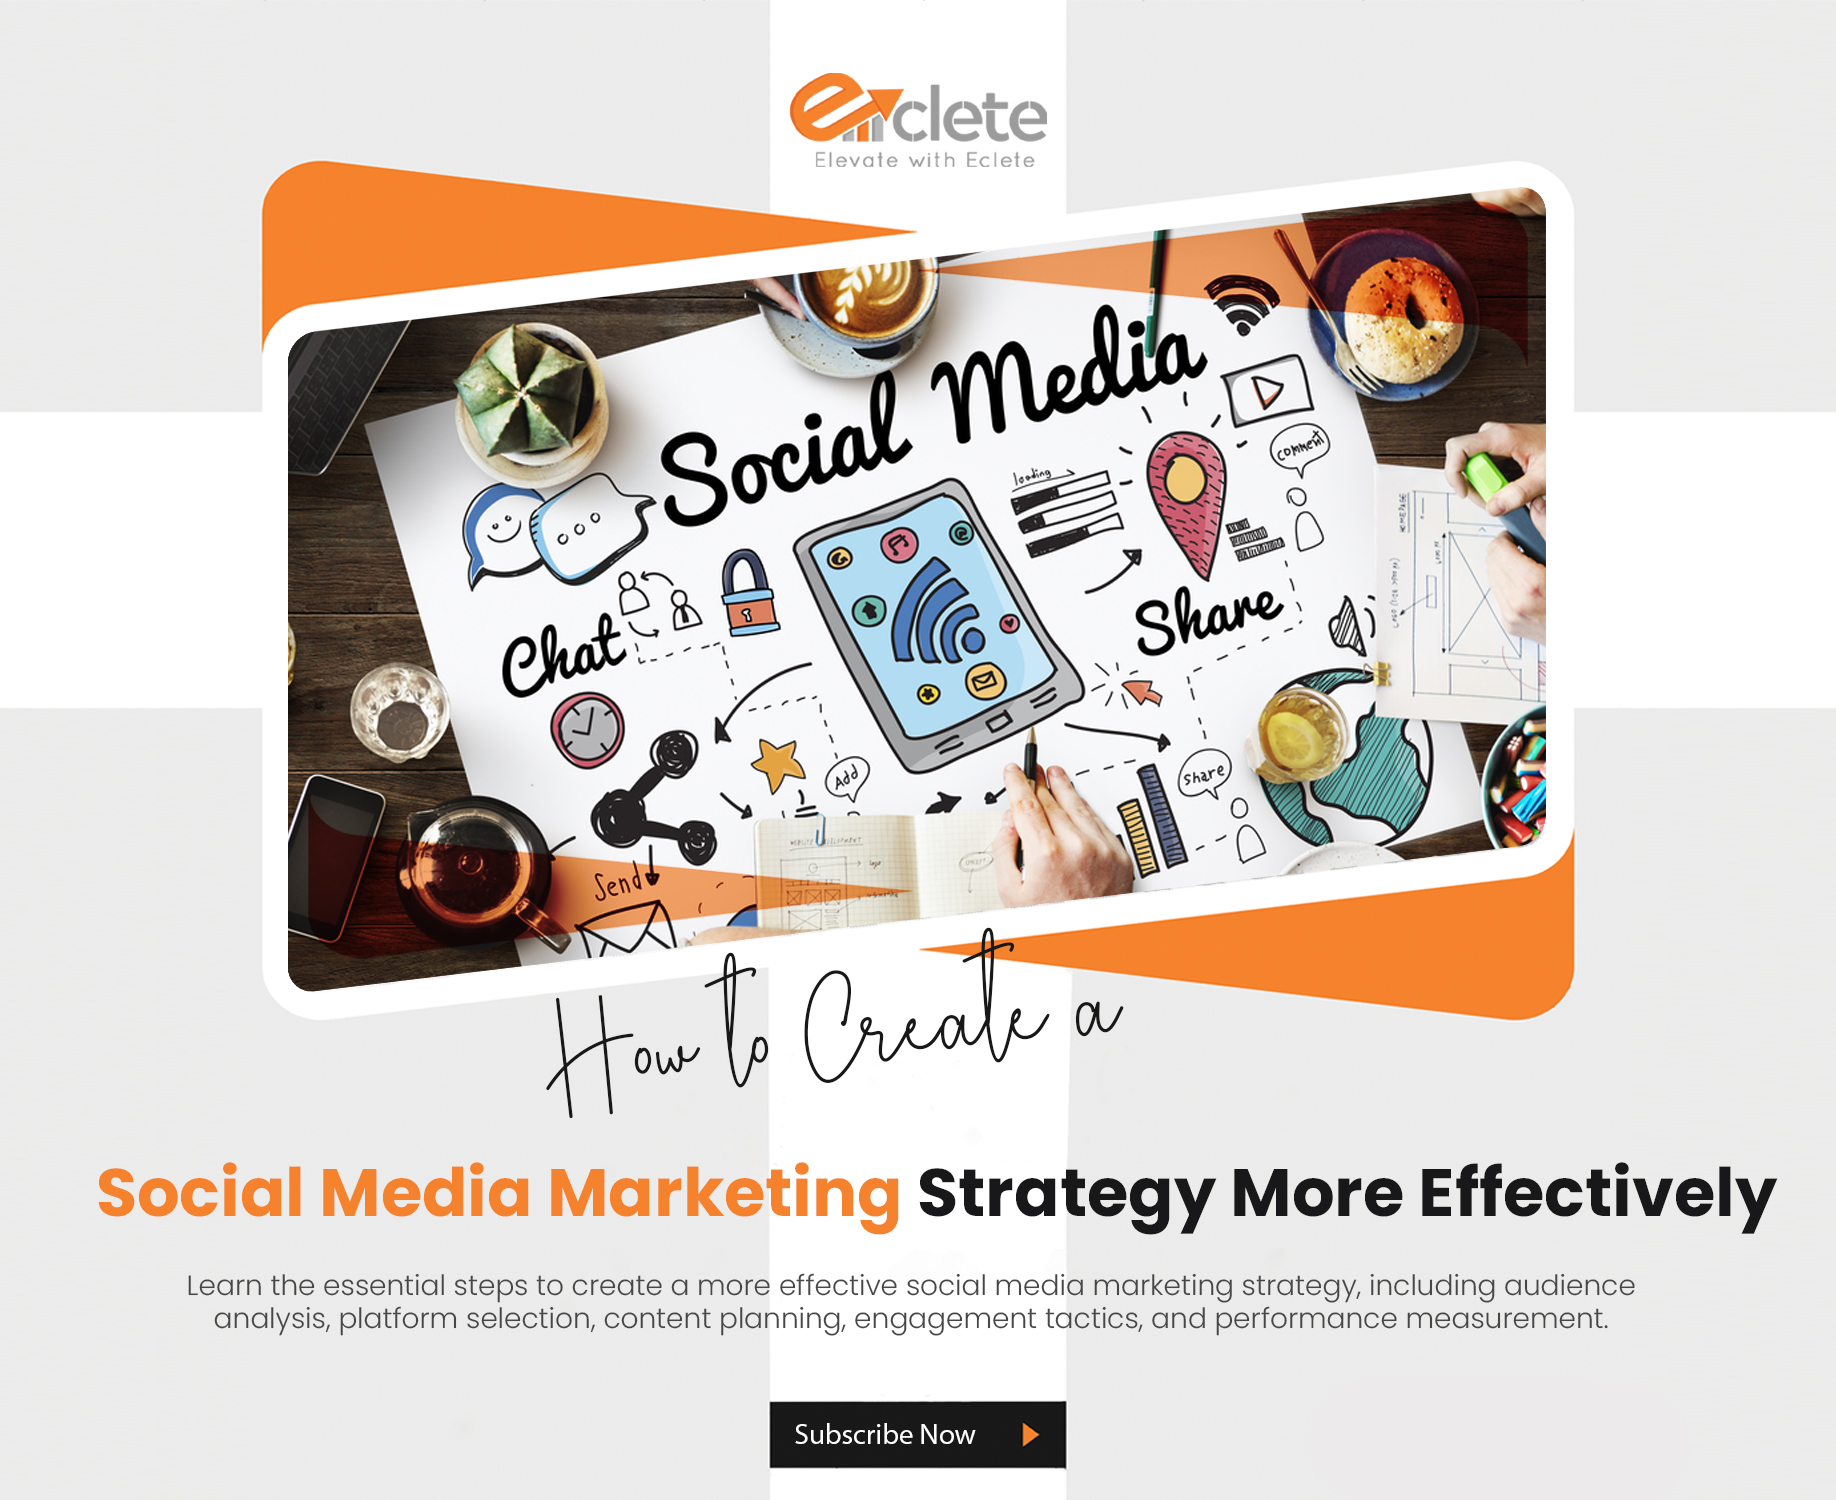 How to Create a Social Media Marketing Strategy More Effectively